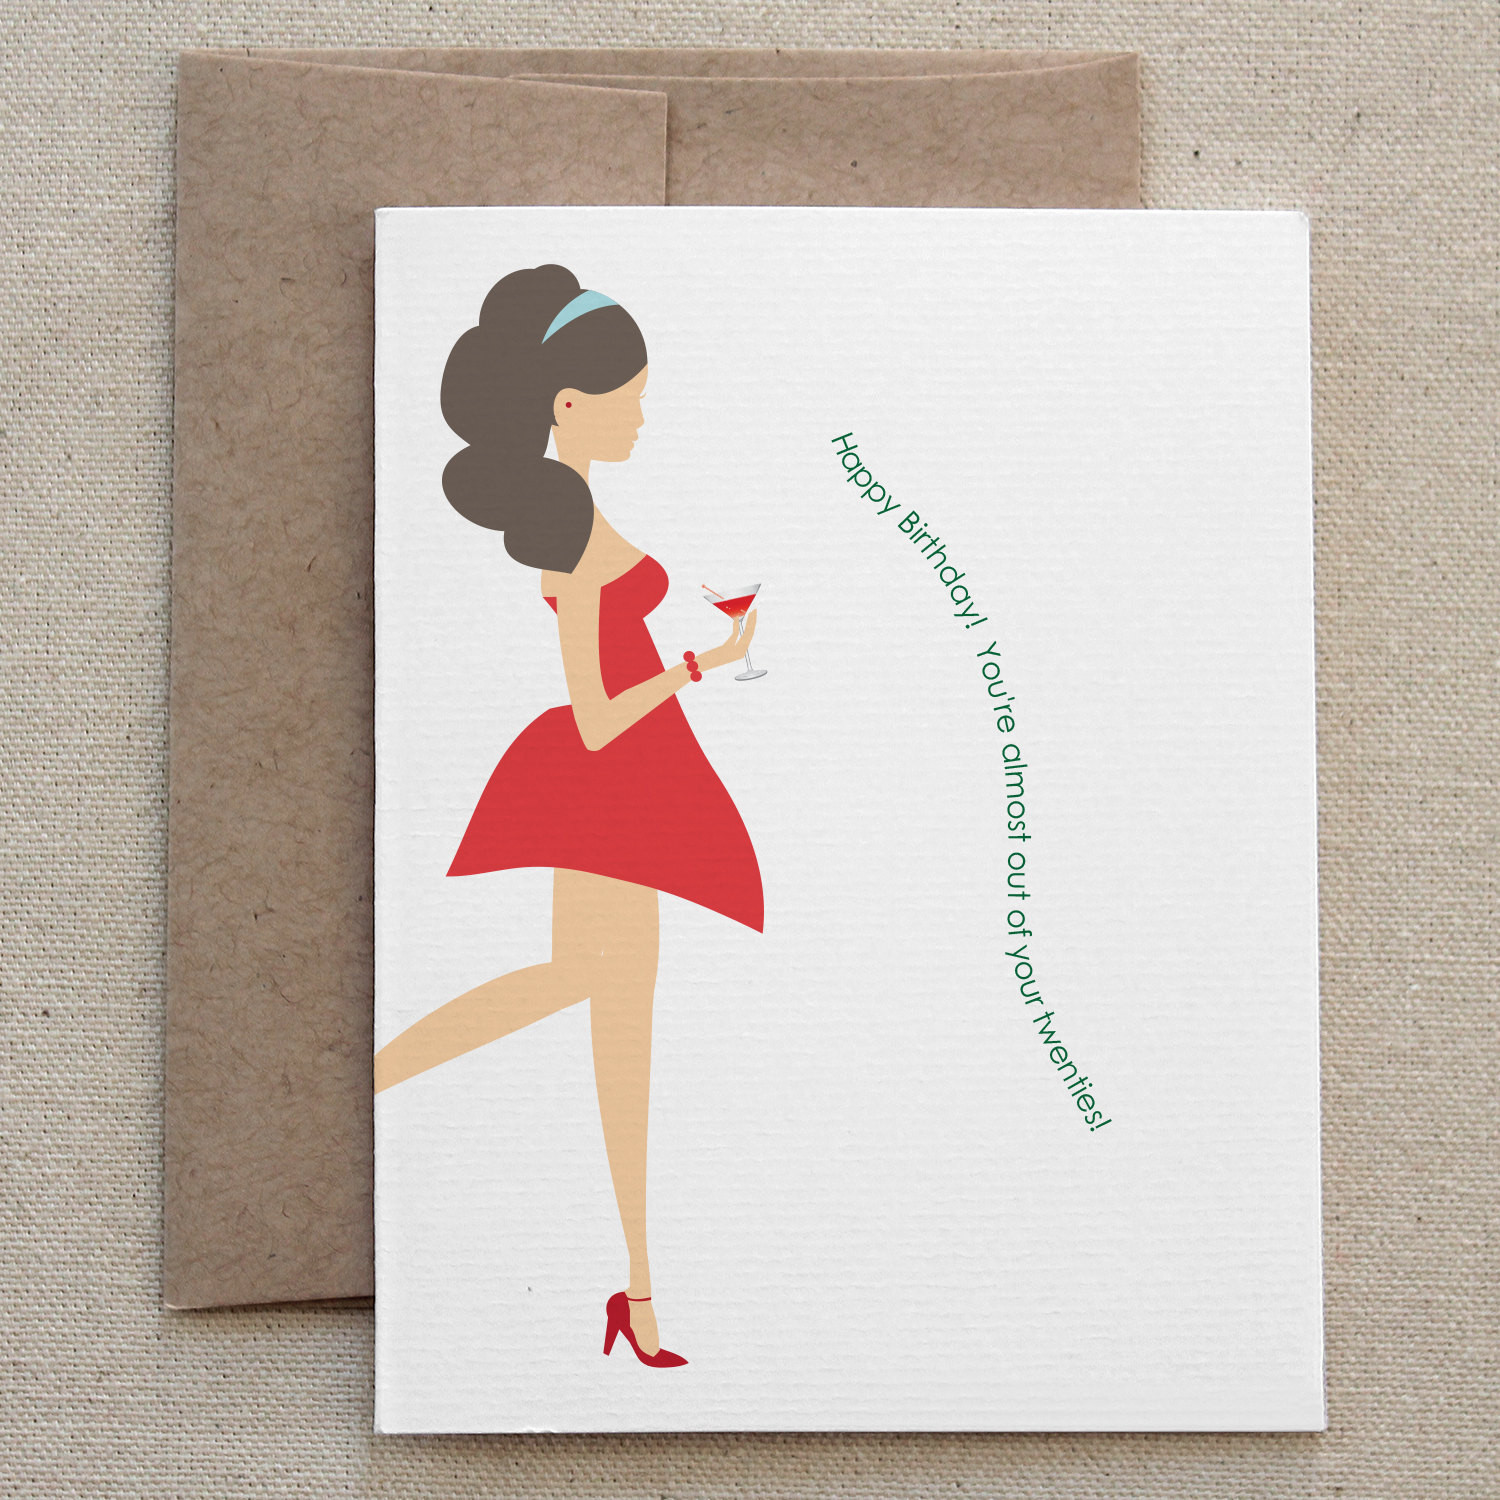 Birthday Cards Funny For Her
 Funny Birthday Card Snarky Sarcastic For Woman Her